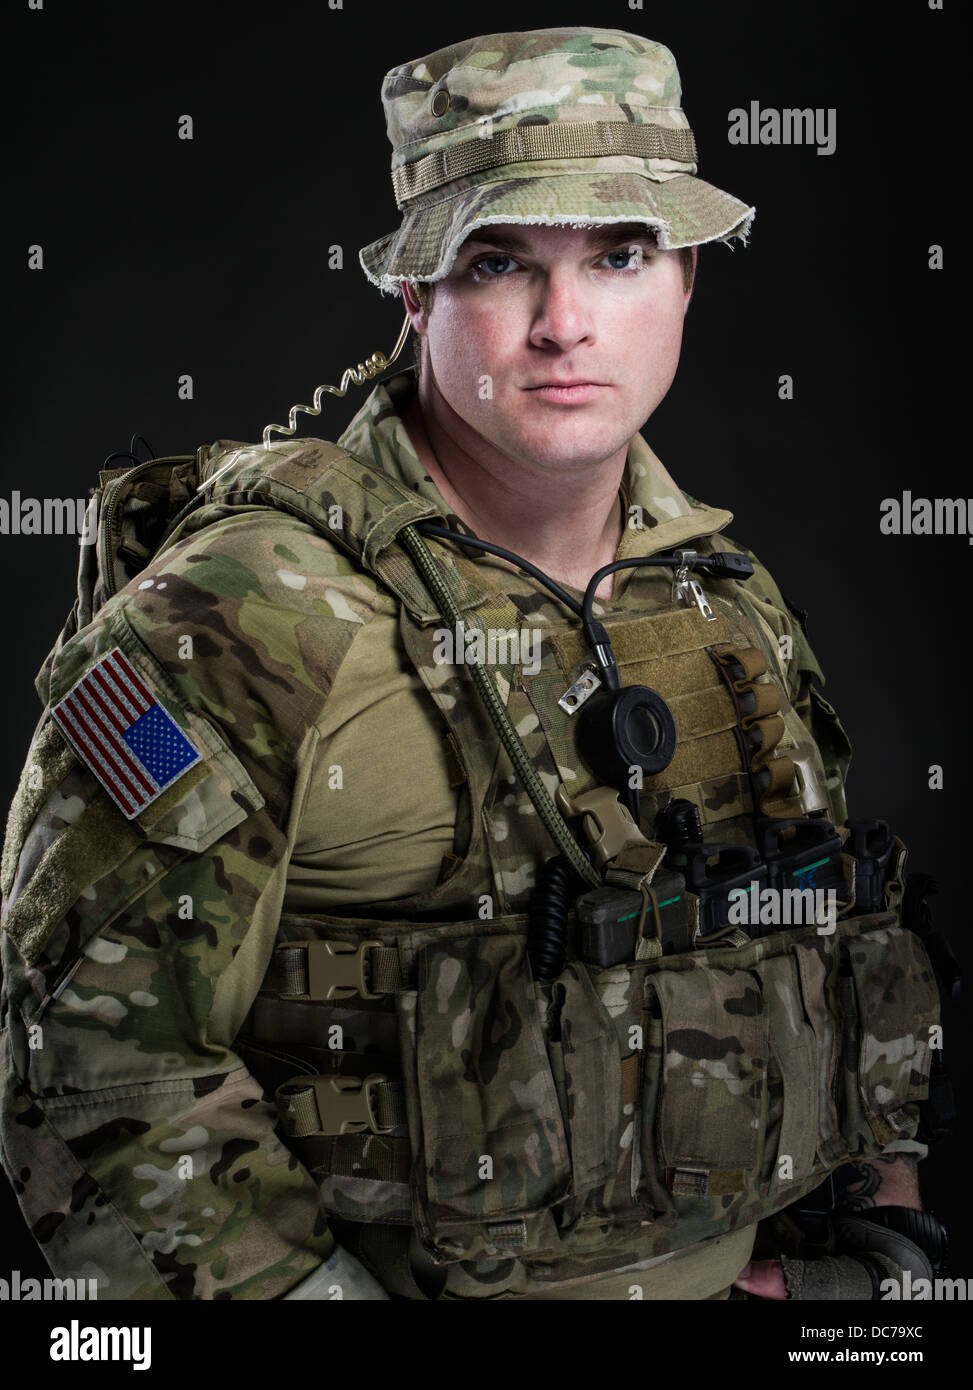 Portrait of a U.S. Army Special Forces Green Beret soldier Stock Photo